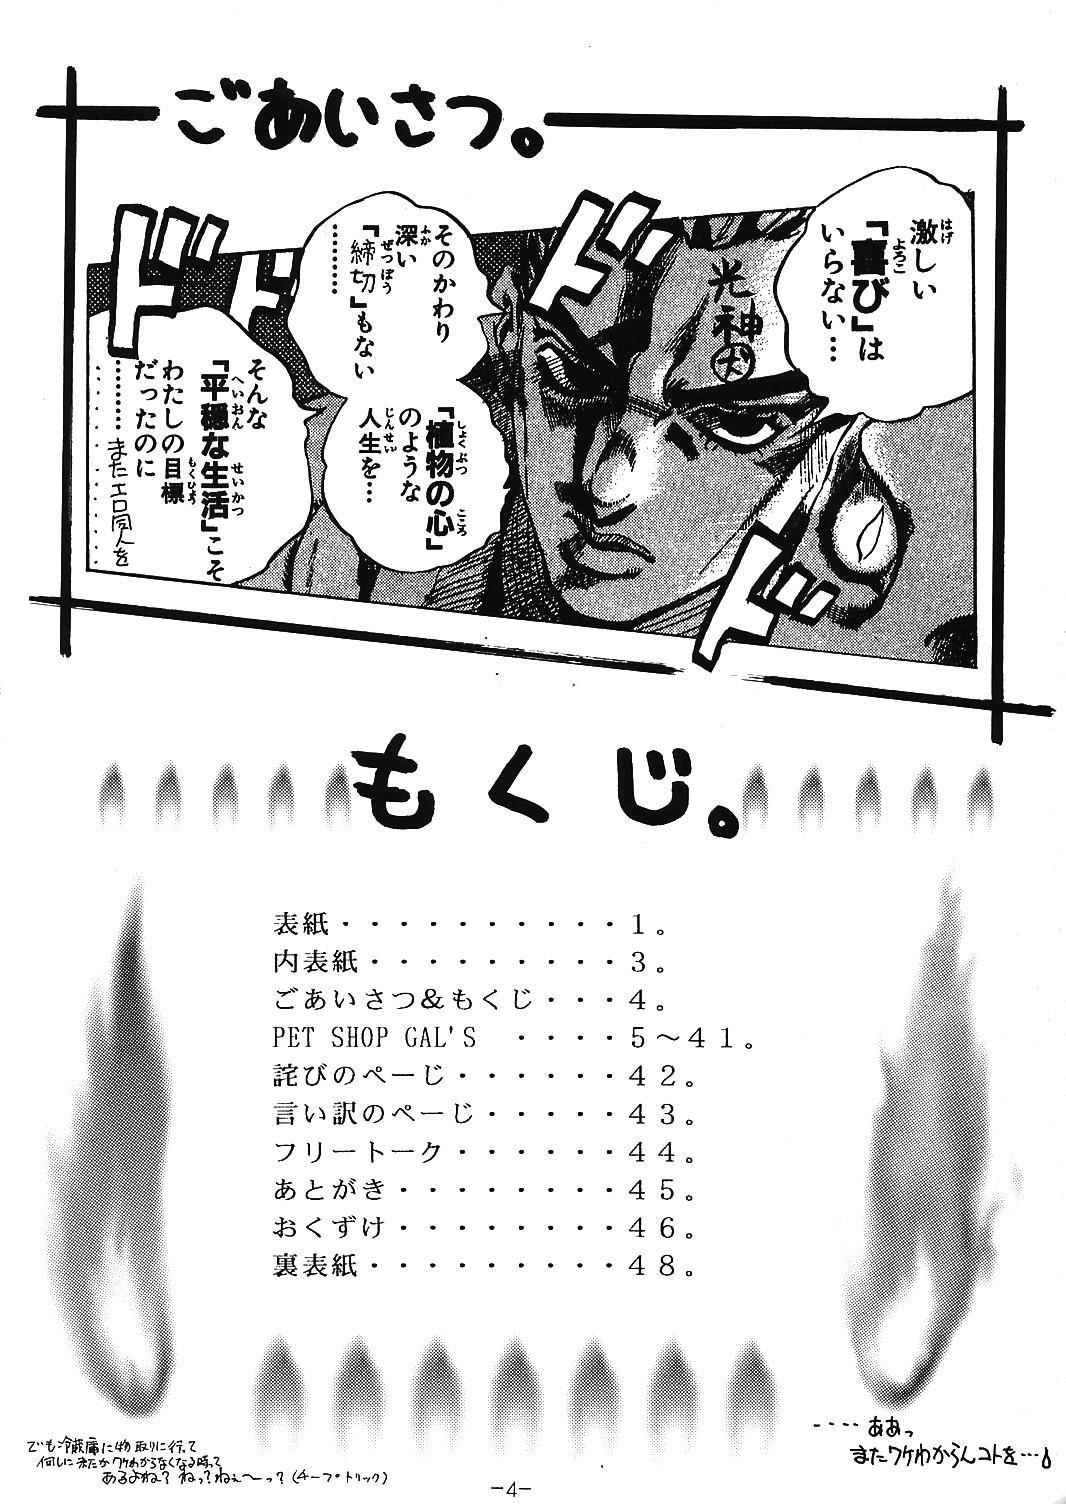 Mas PANST LINE - King of fighters Glory Hole - Page 3